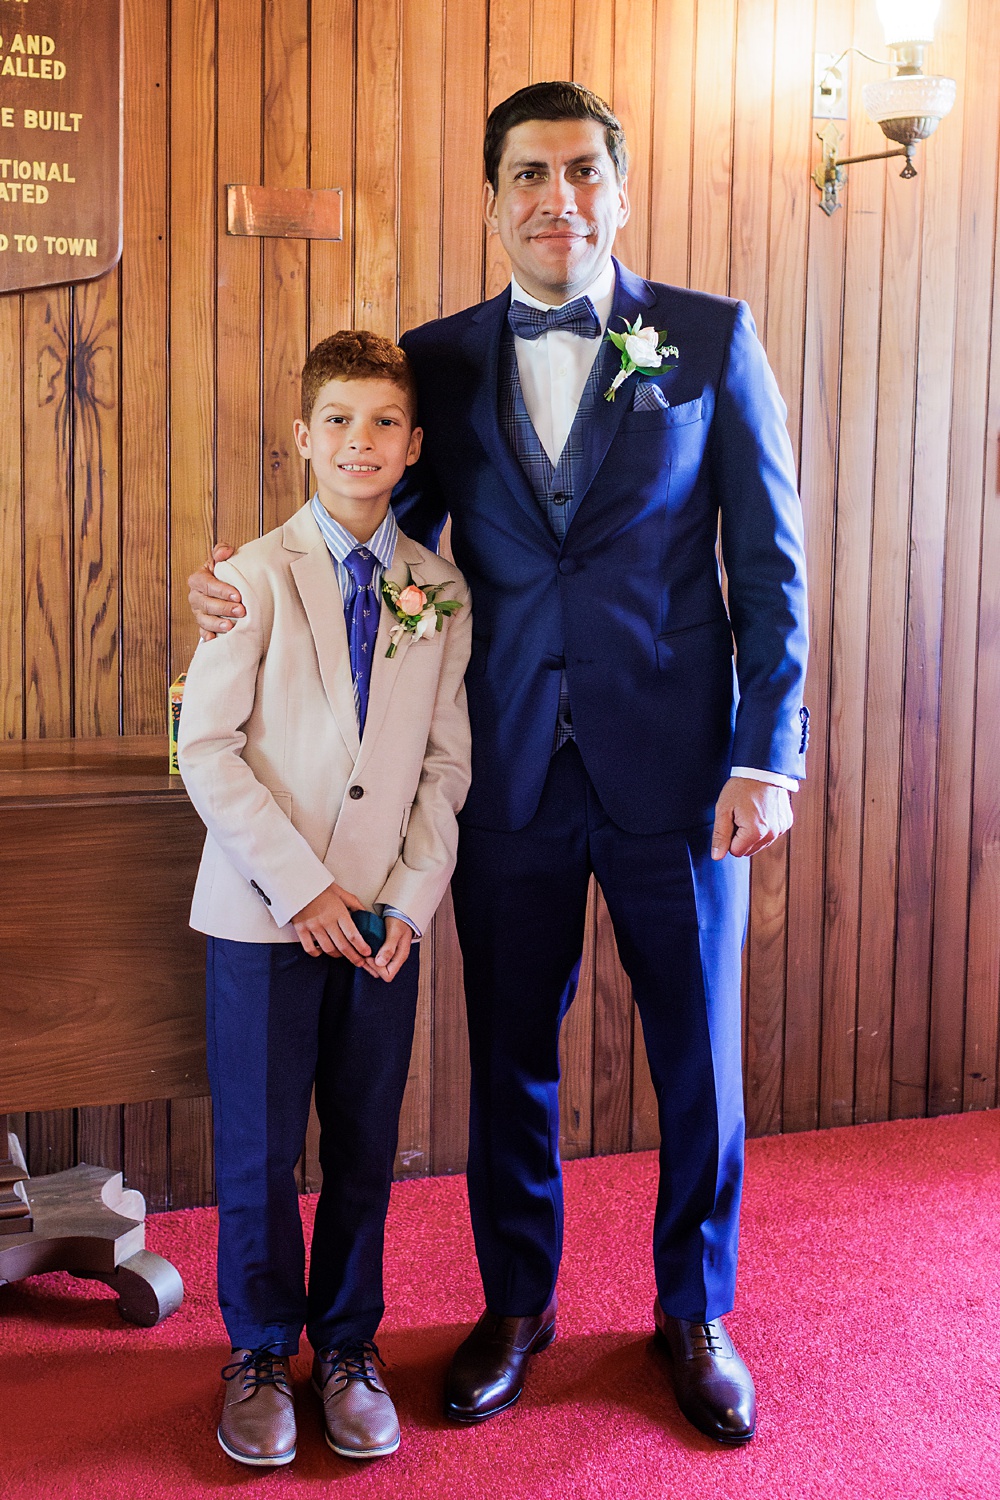 The groom and the ring bearer wait for the ceremony to start at Spurwink Church Maine